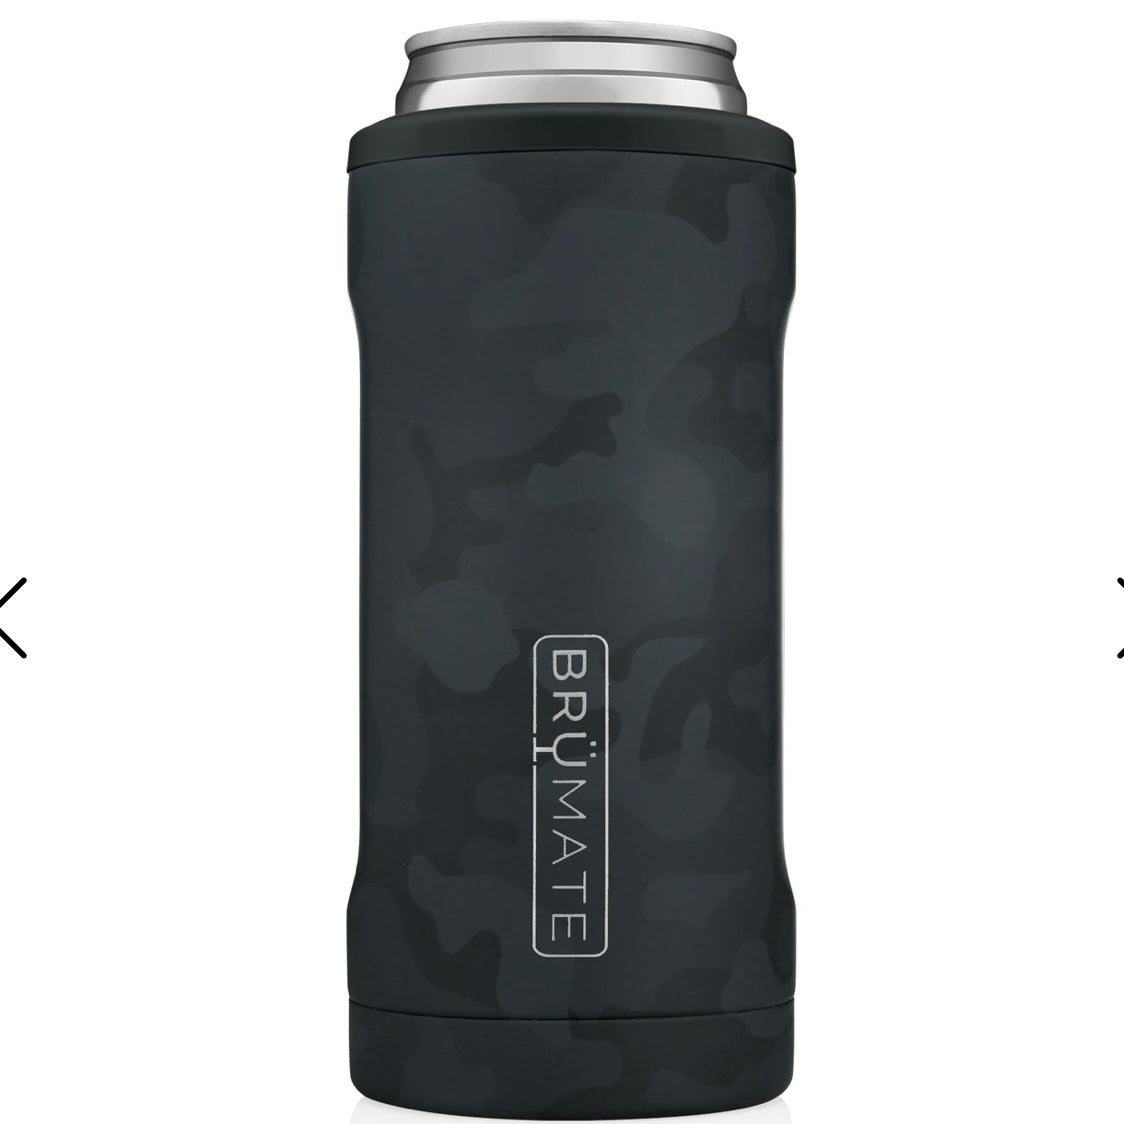 slim cans leak-proof drinkware hot to cold insulated drinkware tumbler like yeti brumate spillproof black camo